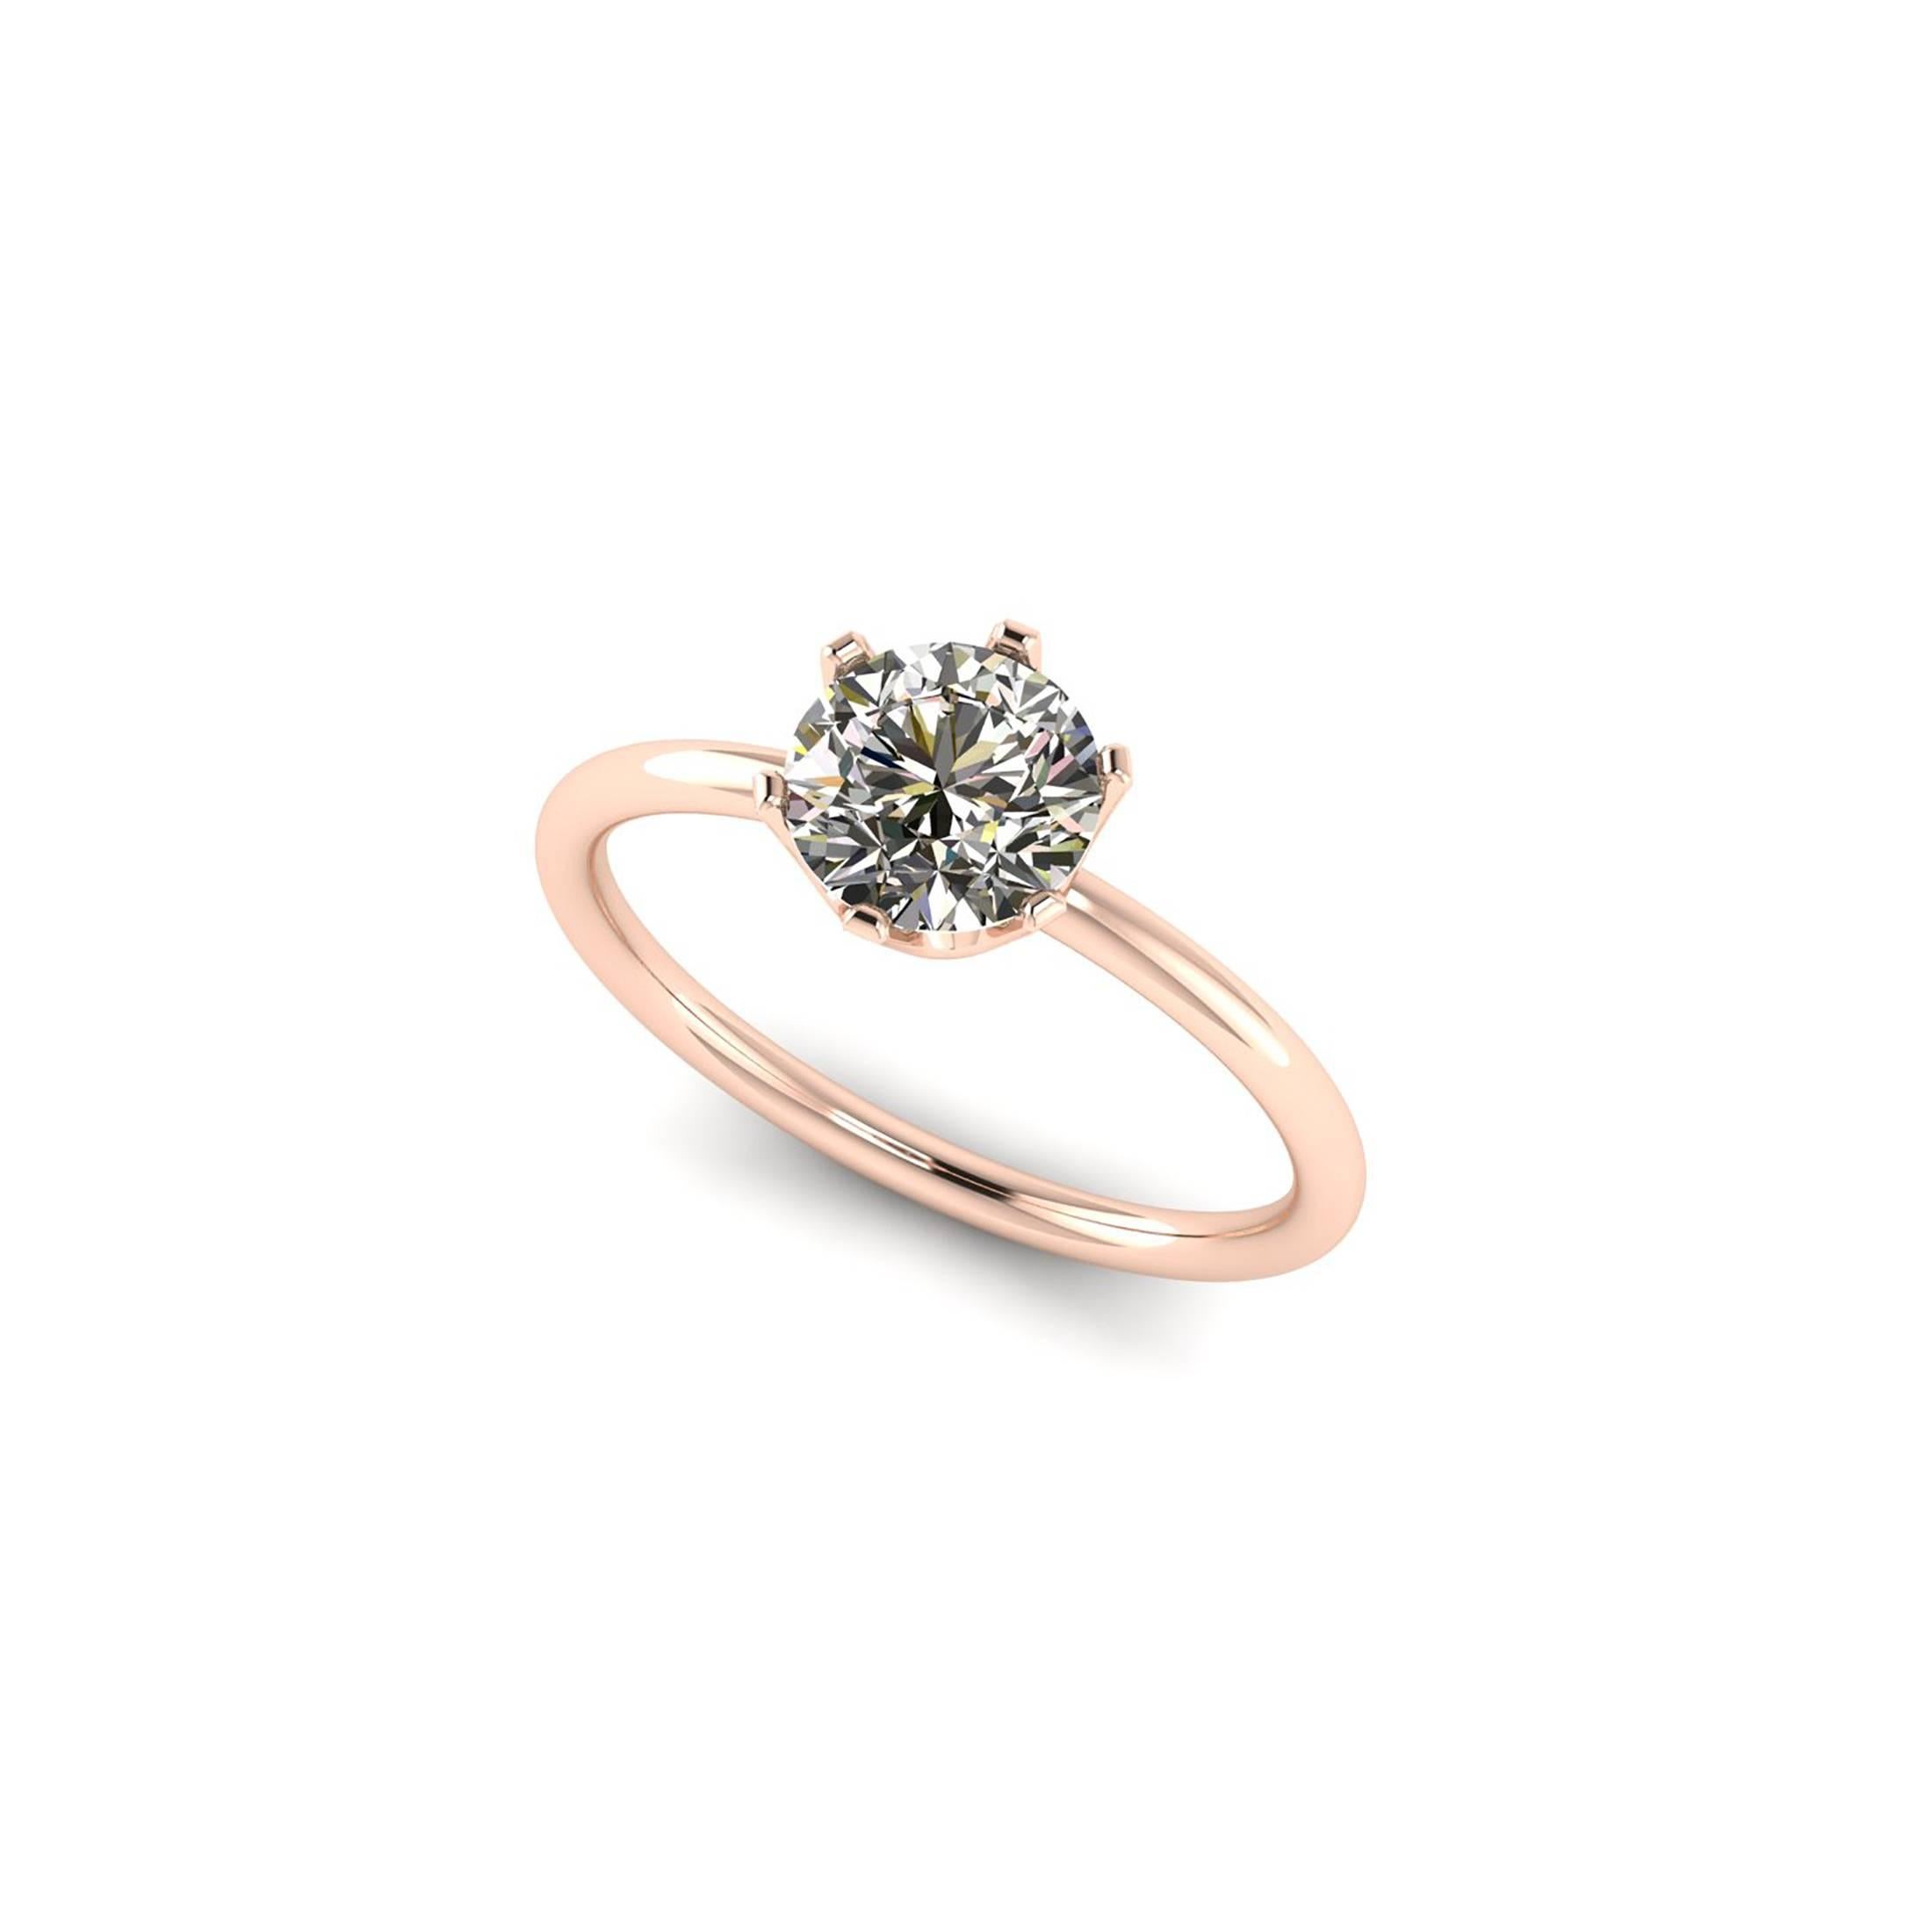 Modern GIA Certified 1.01 Carat White Diamond in 18 Rose Gold Solitaire Engagement Ring For Sale